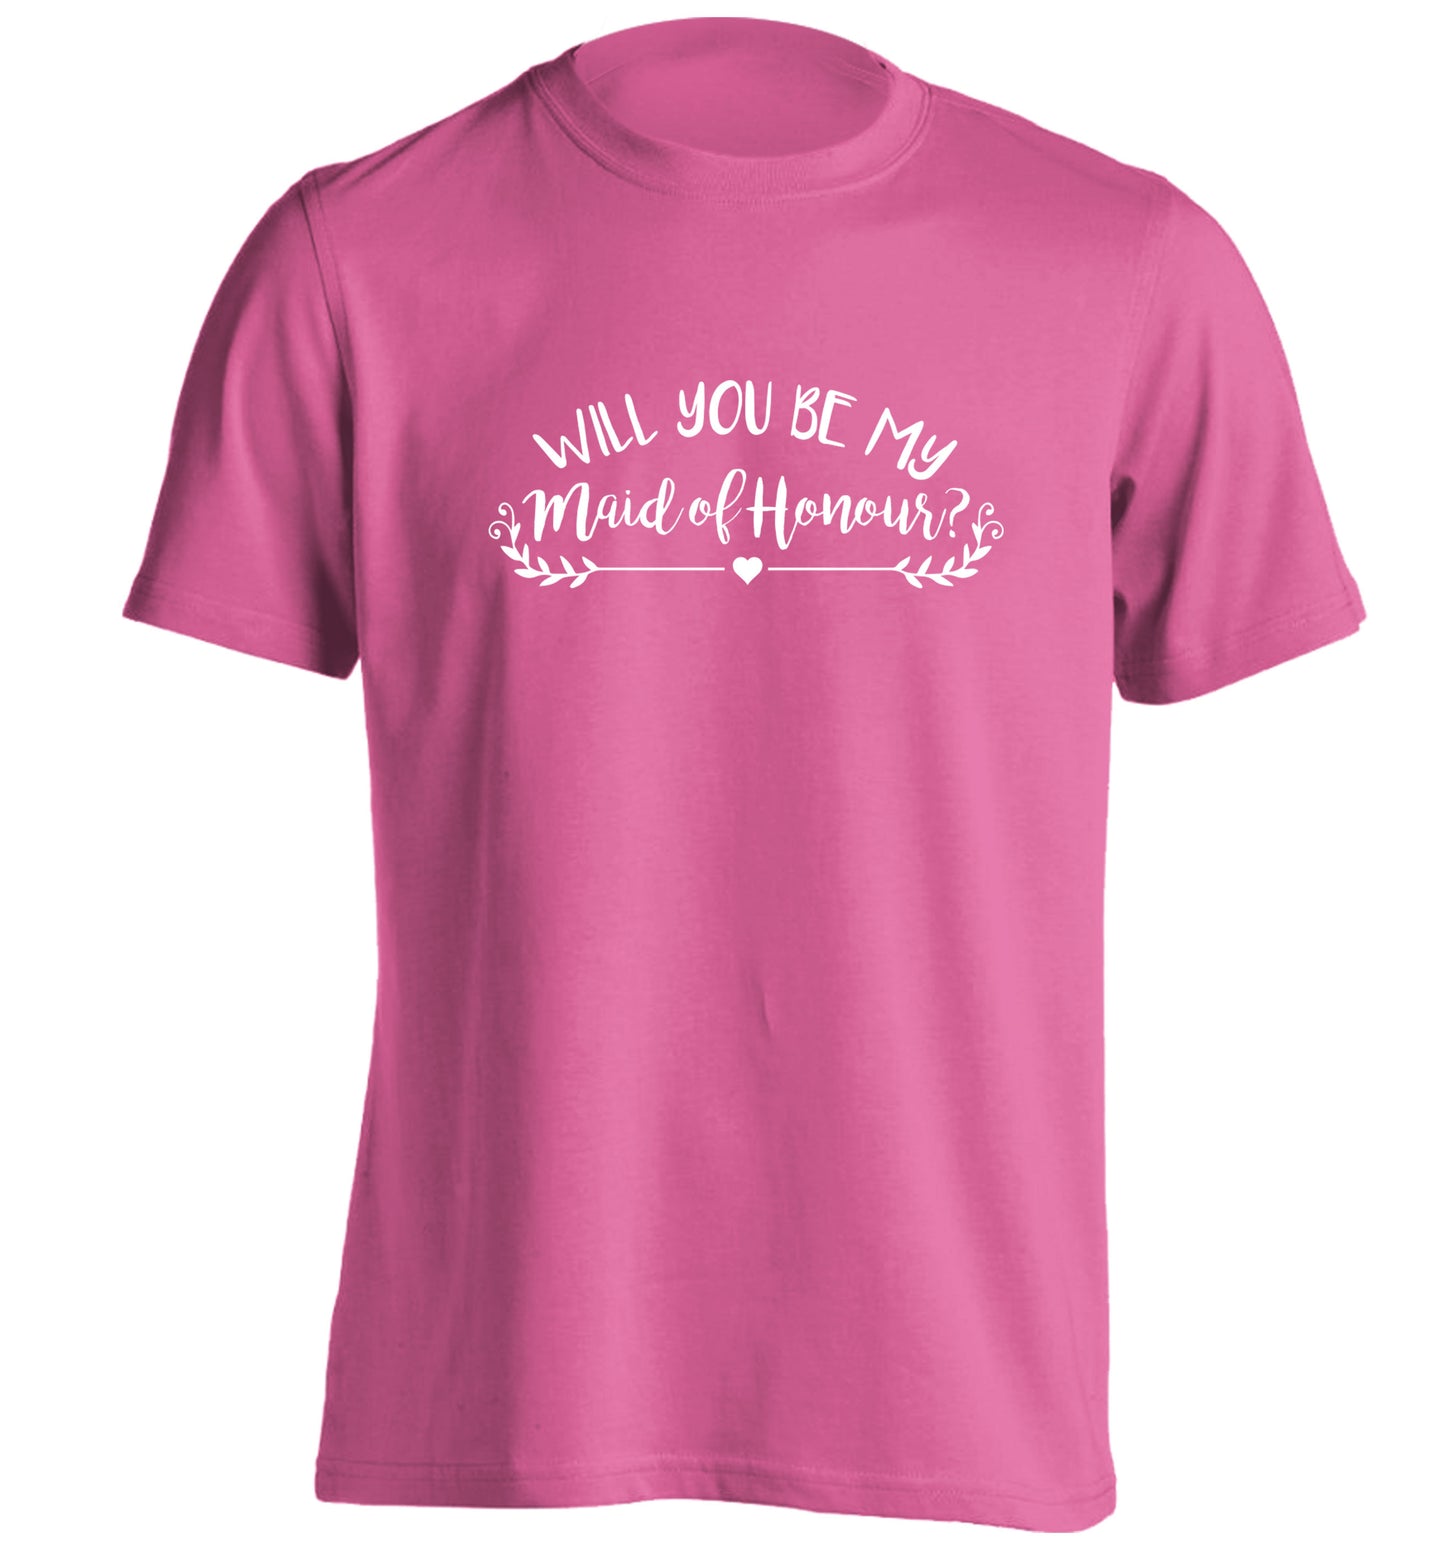 Will you be my maid of honour? adults unisex pink Tshirt 2XL